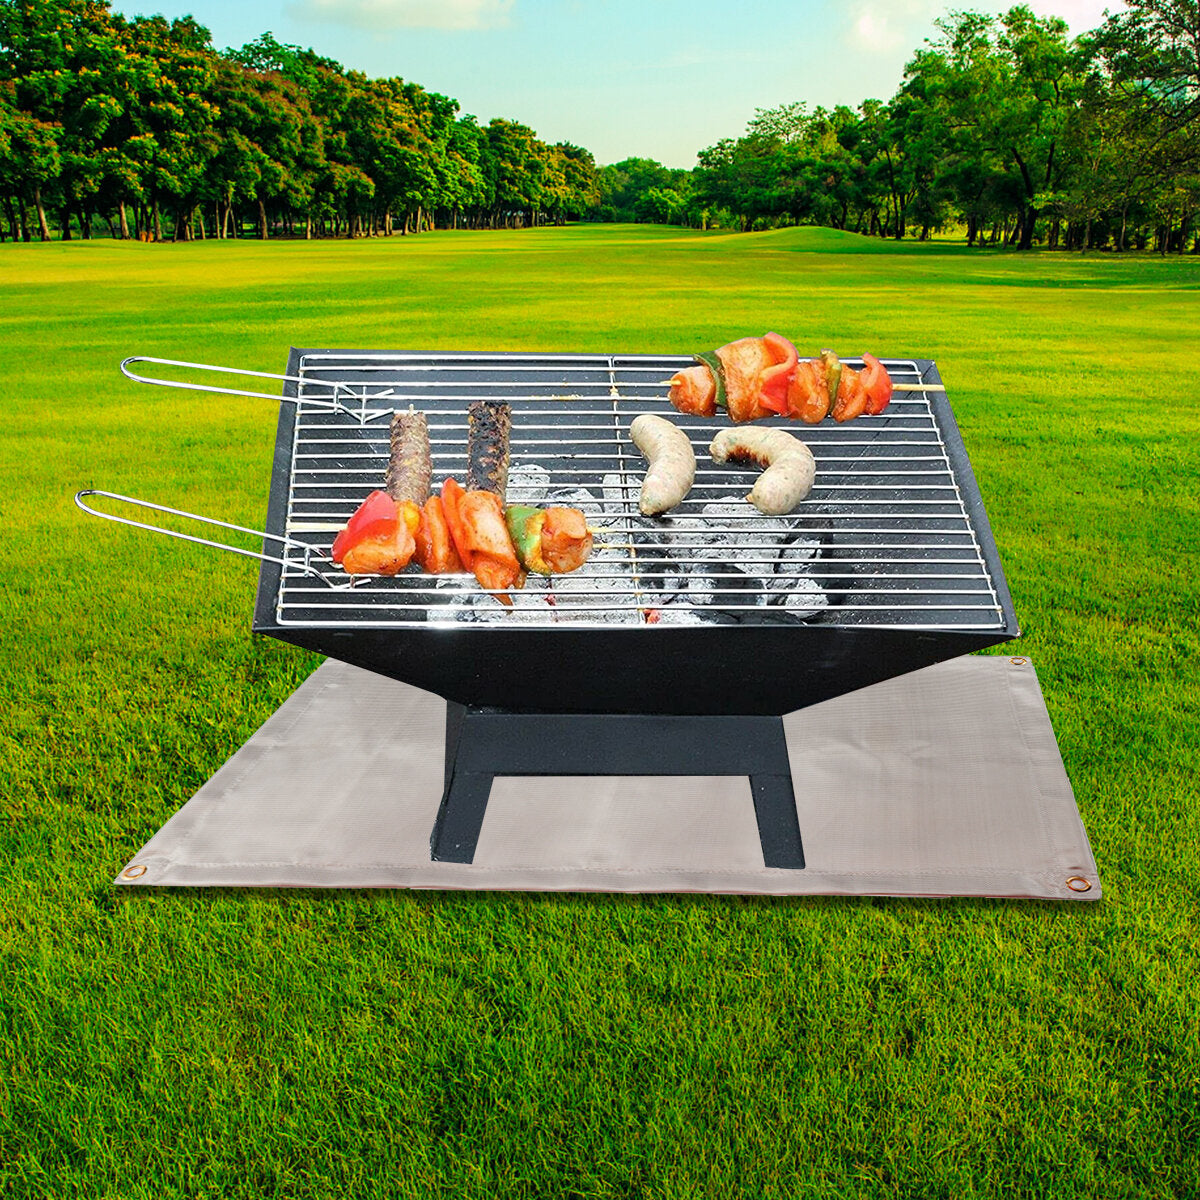 Camping Fireproof Grill Mat Cloth Flame Retardant Ember Mat Blanket Heat Insulation Pad For Outdoors Barbecue